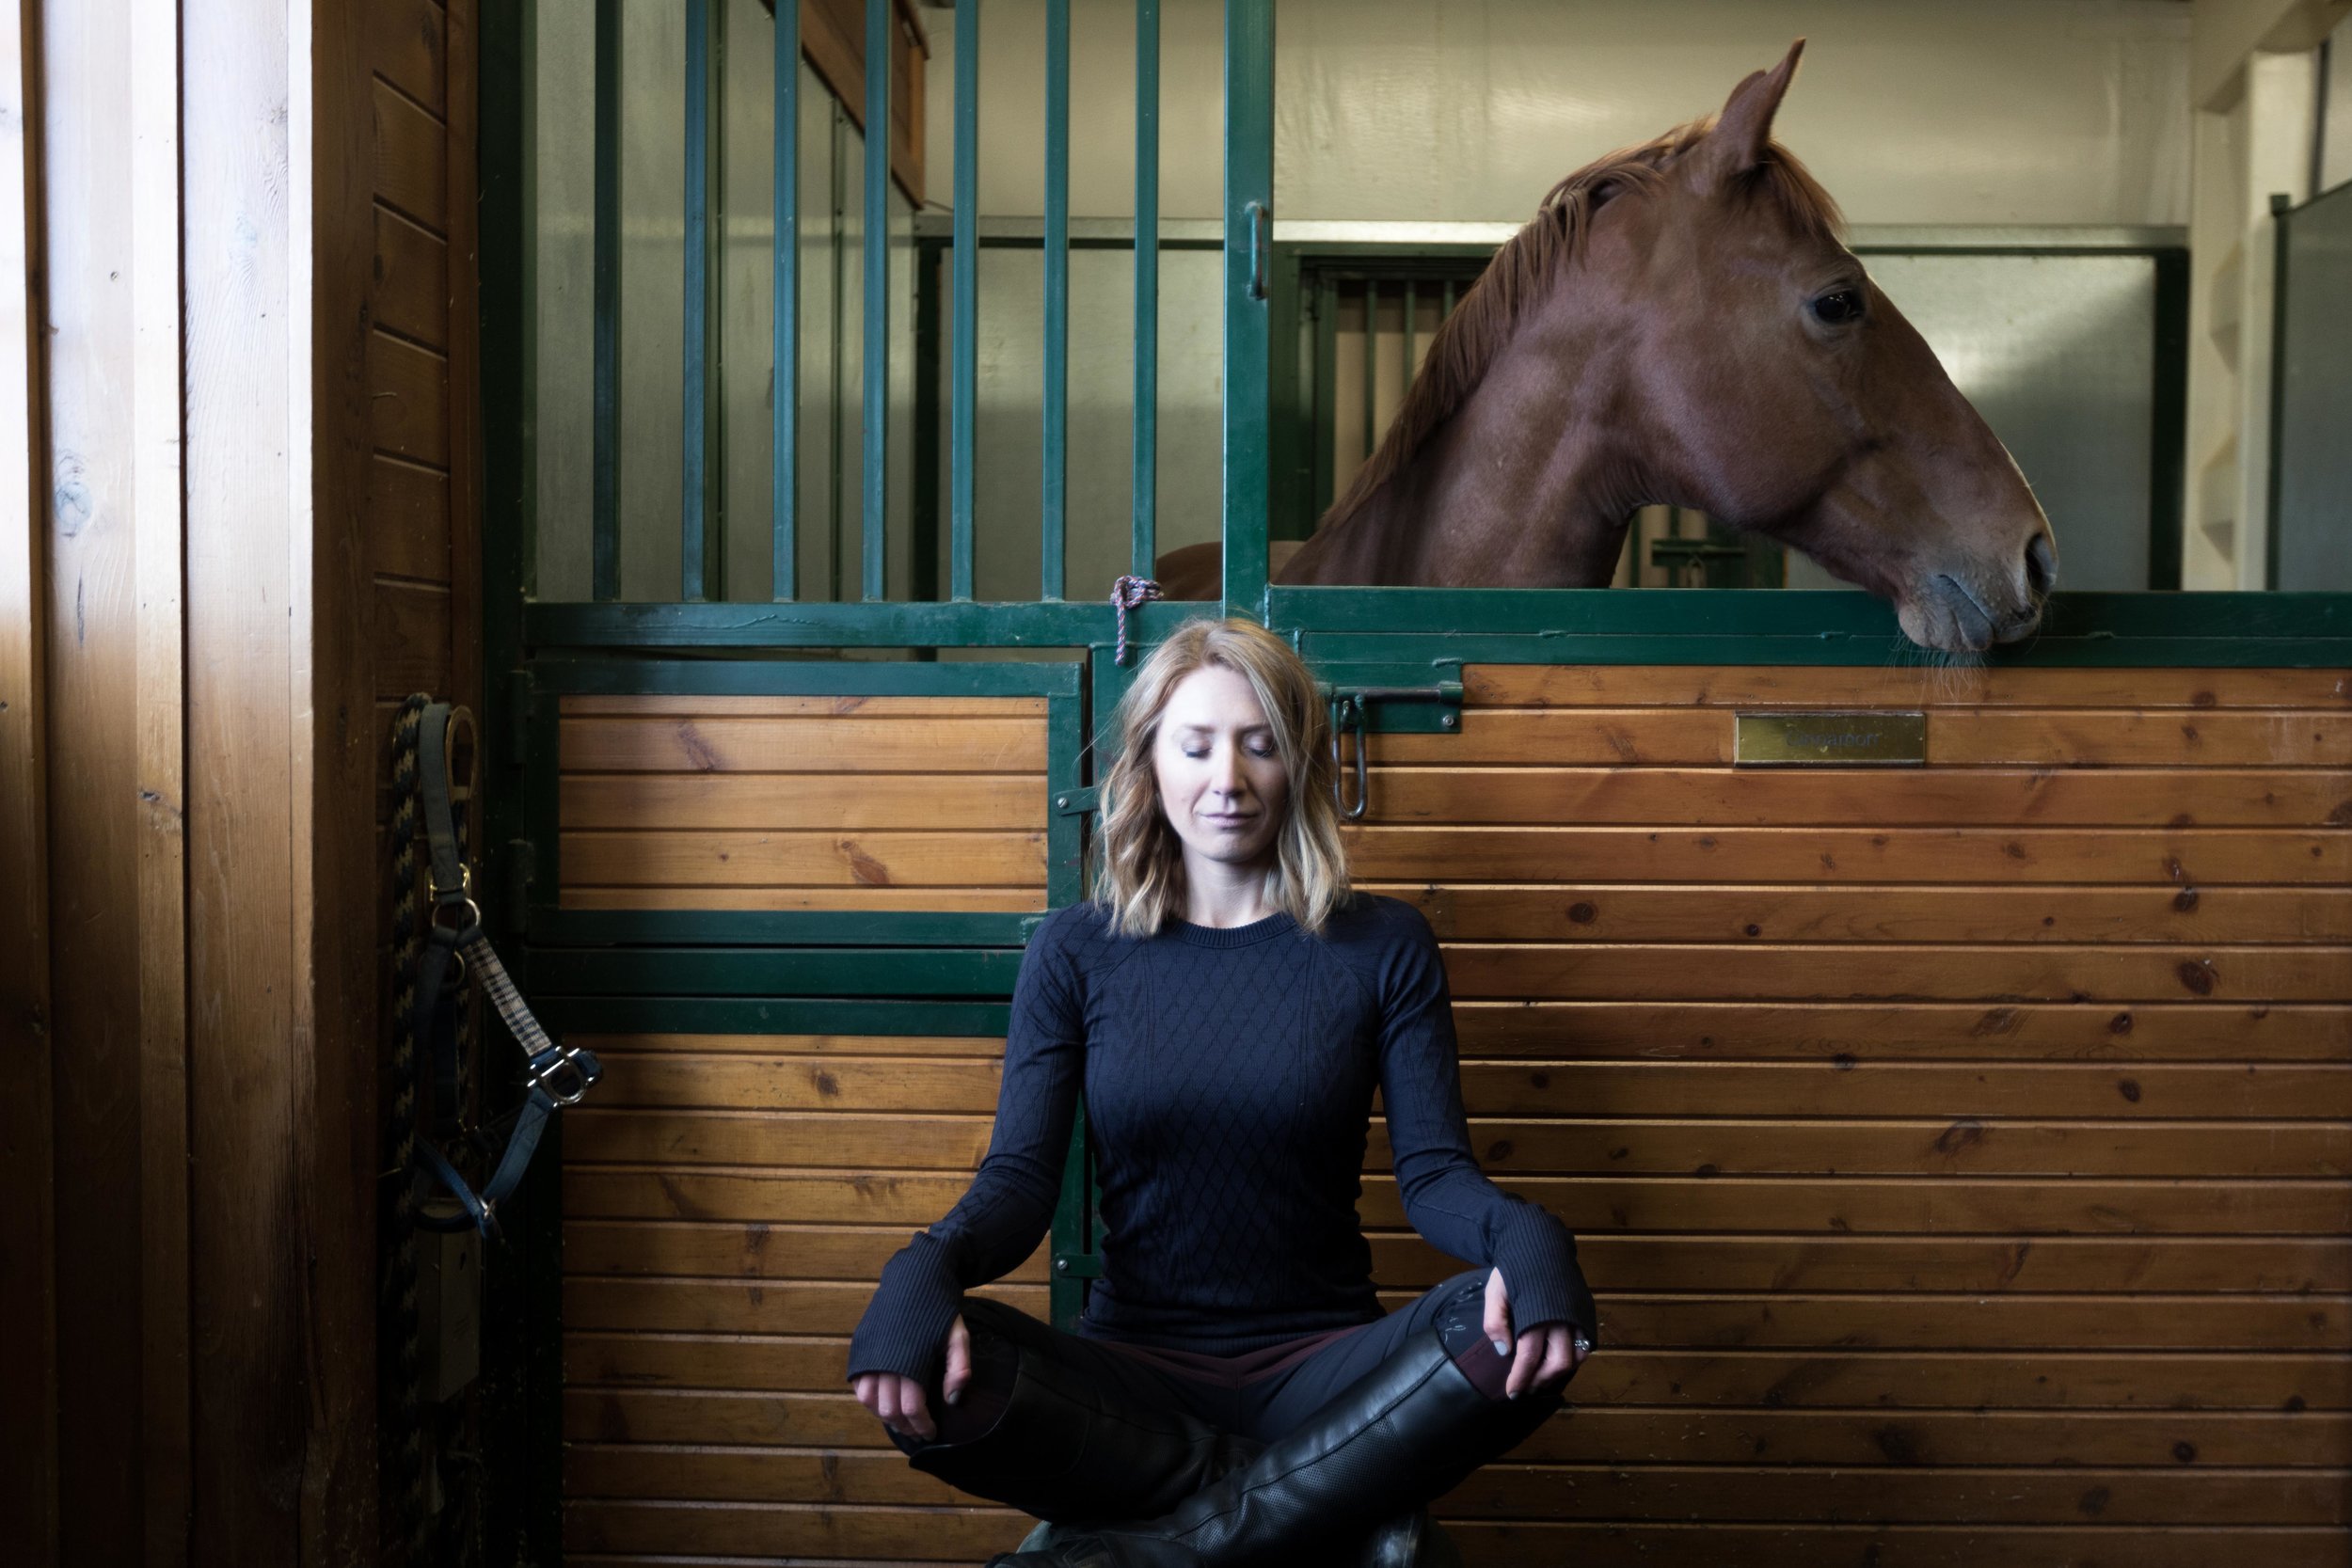 Mind.Body.Horse.Yoga.For.Equestrians.Online.Workshops.Jimena.Peck.Photography.-Mind.Body.Horse.Yoga.For.Equestrians.Online.Workshops.Jimena.Peck.Photography.Poses-6197.jpg